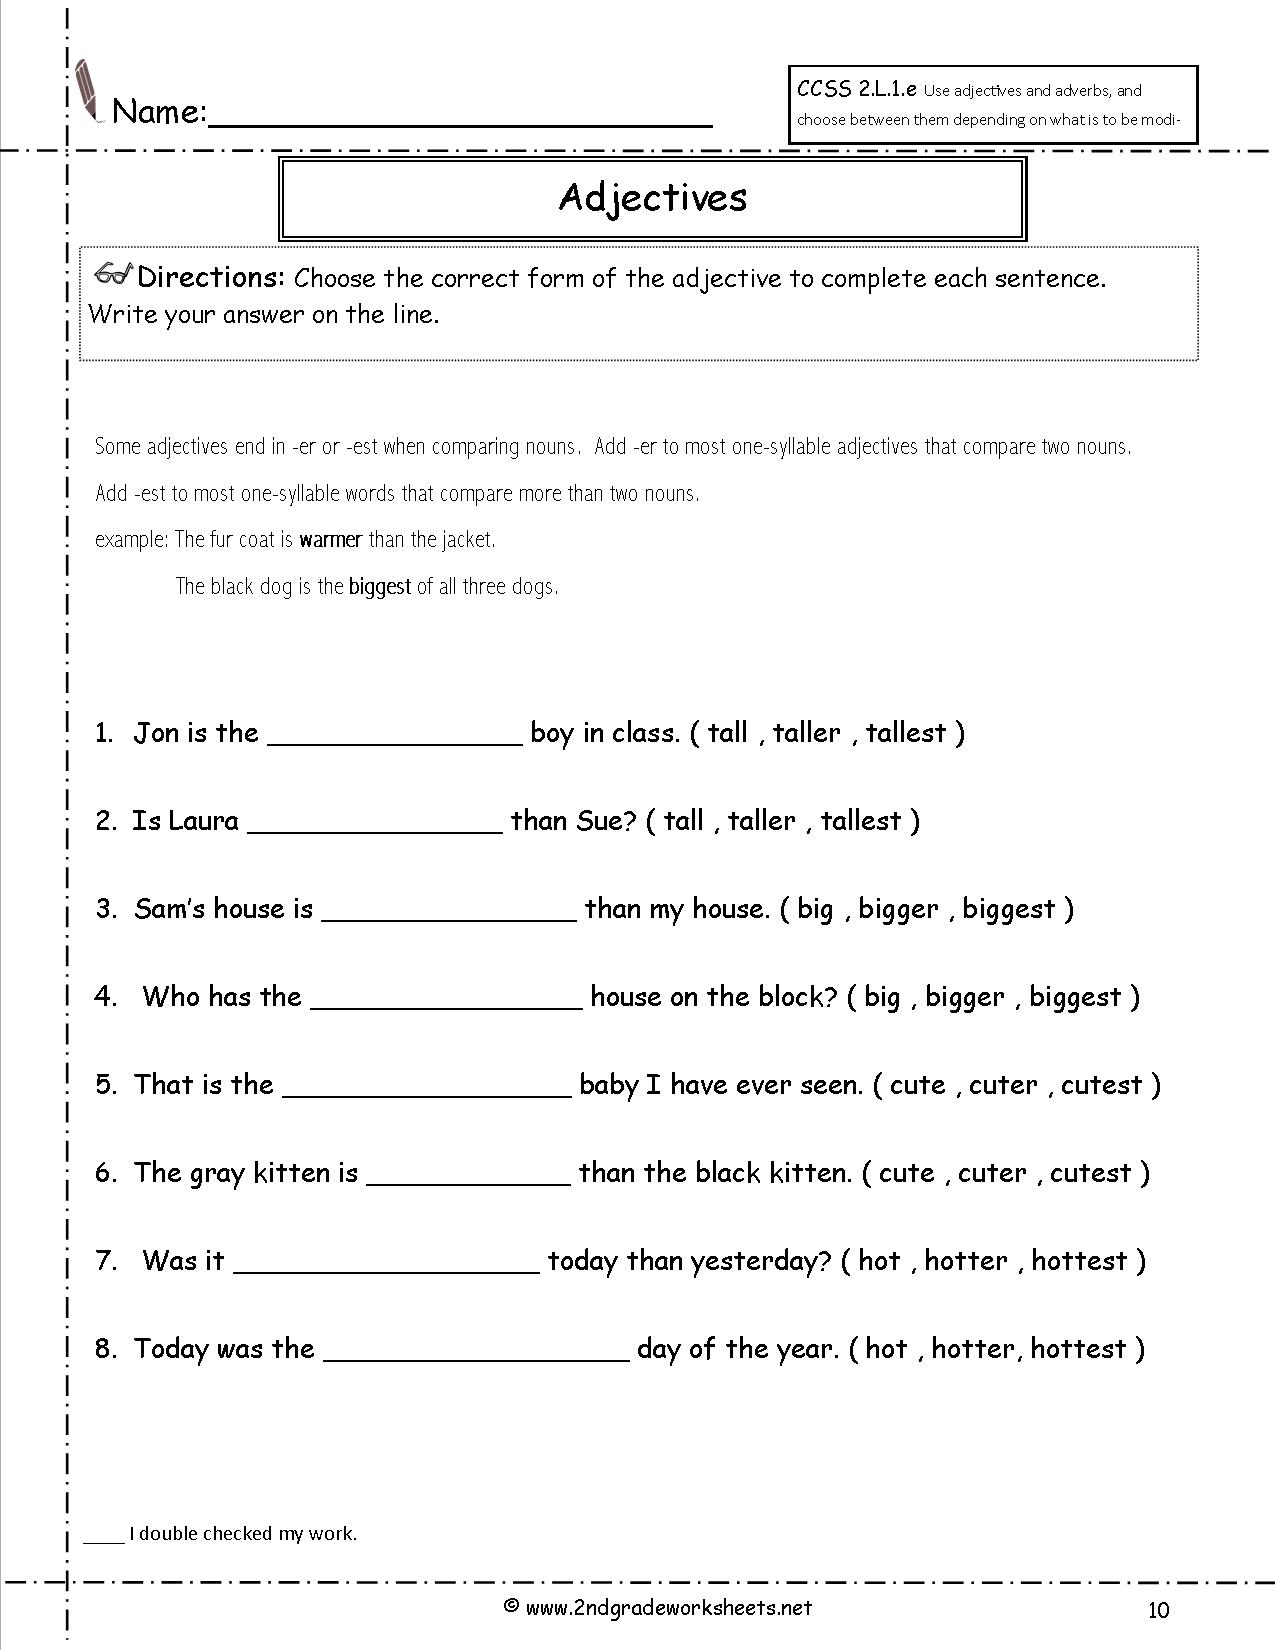 17 Best Images Of Worksheets Adjectives And Adverbs Sentence Adjectives And Adverbs Worksheets